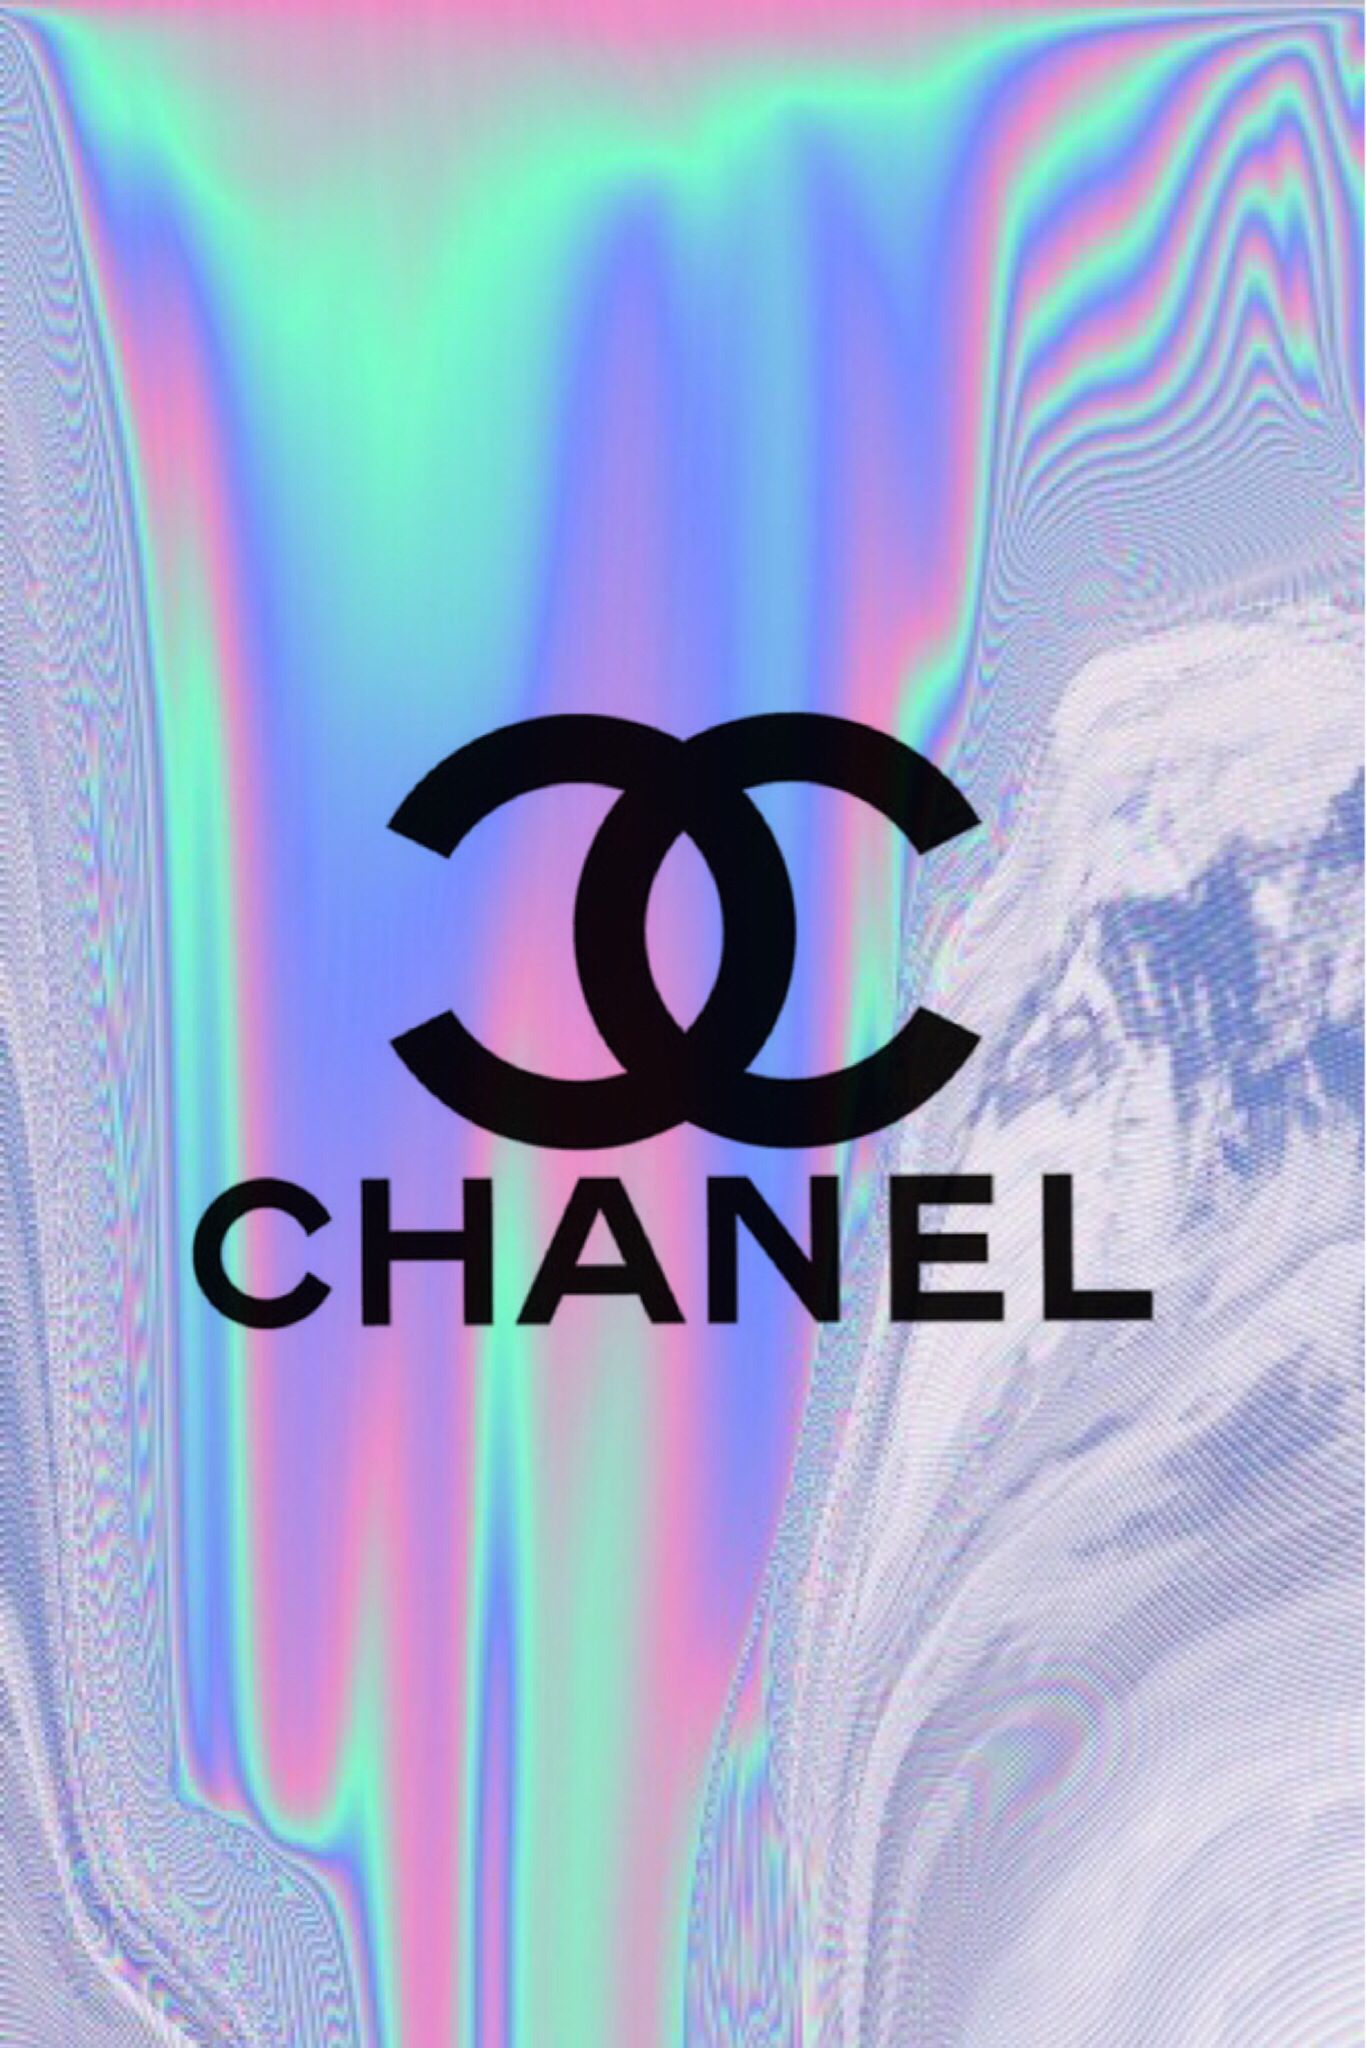 Chanel holographic iphone wallpaper chanel wallpapers iphone wallpaper chanel wallpaper